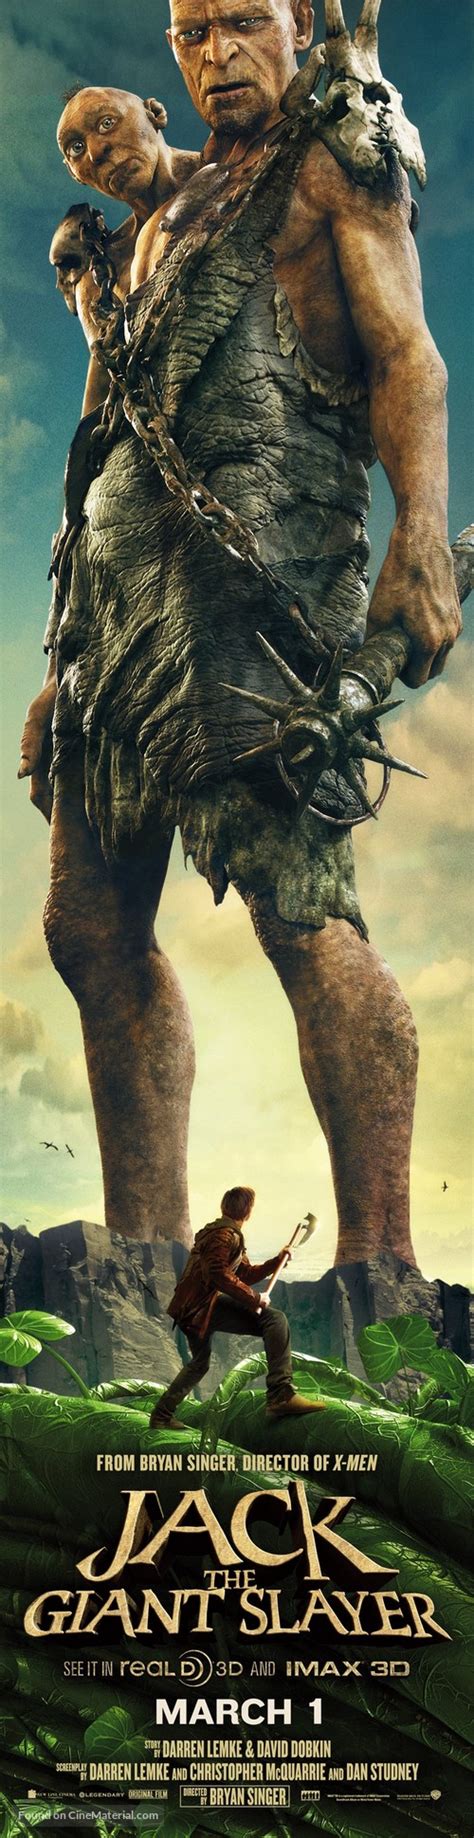 Jack the Giant Slayer (2013) movie poster